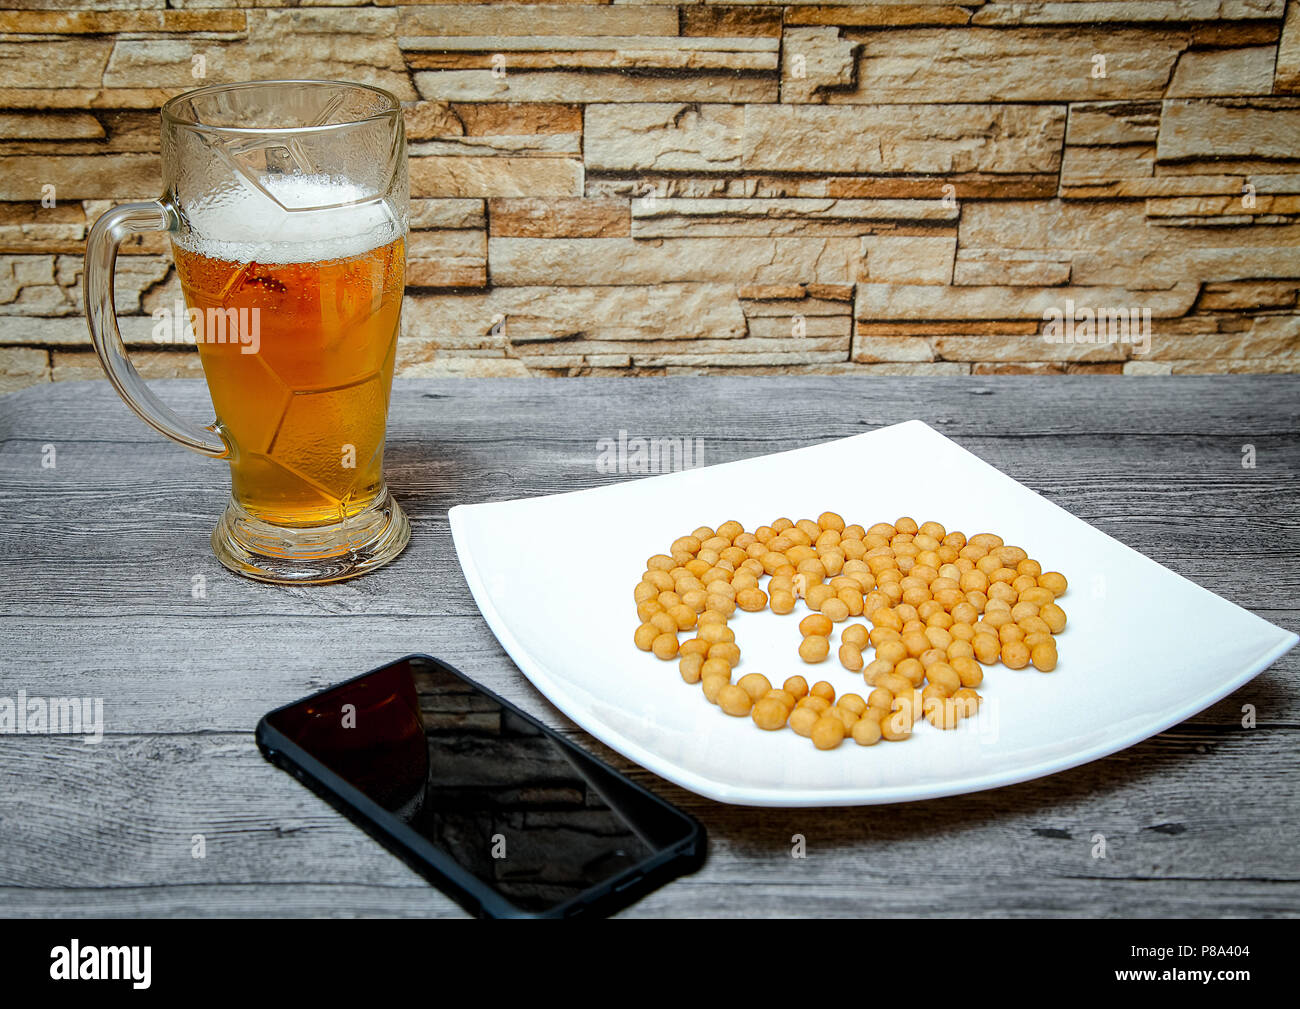 On a wooden table is a large glass of beer, a plate of nuts and a phone. Stock Photo